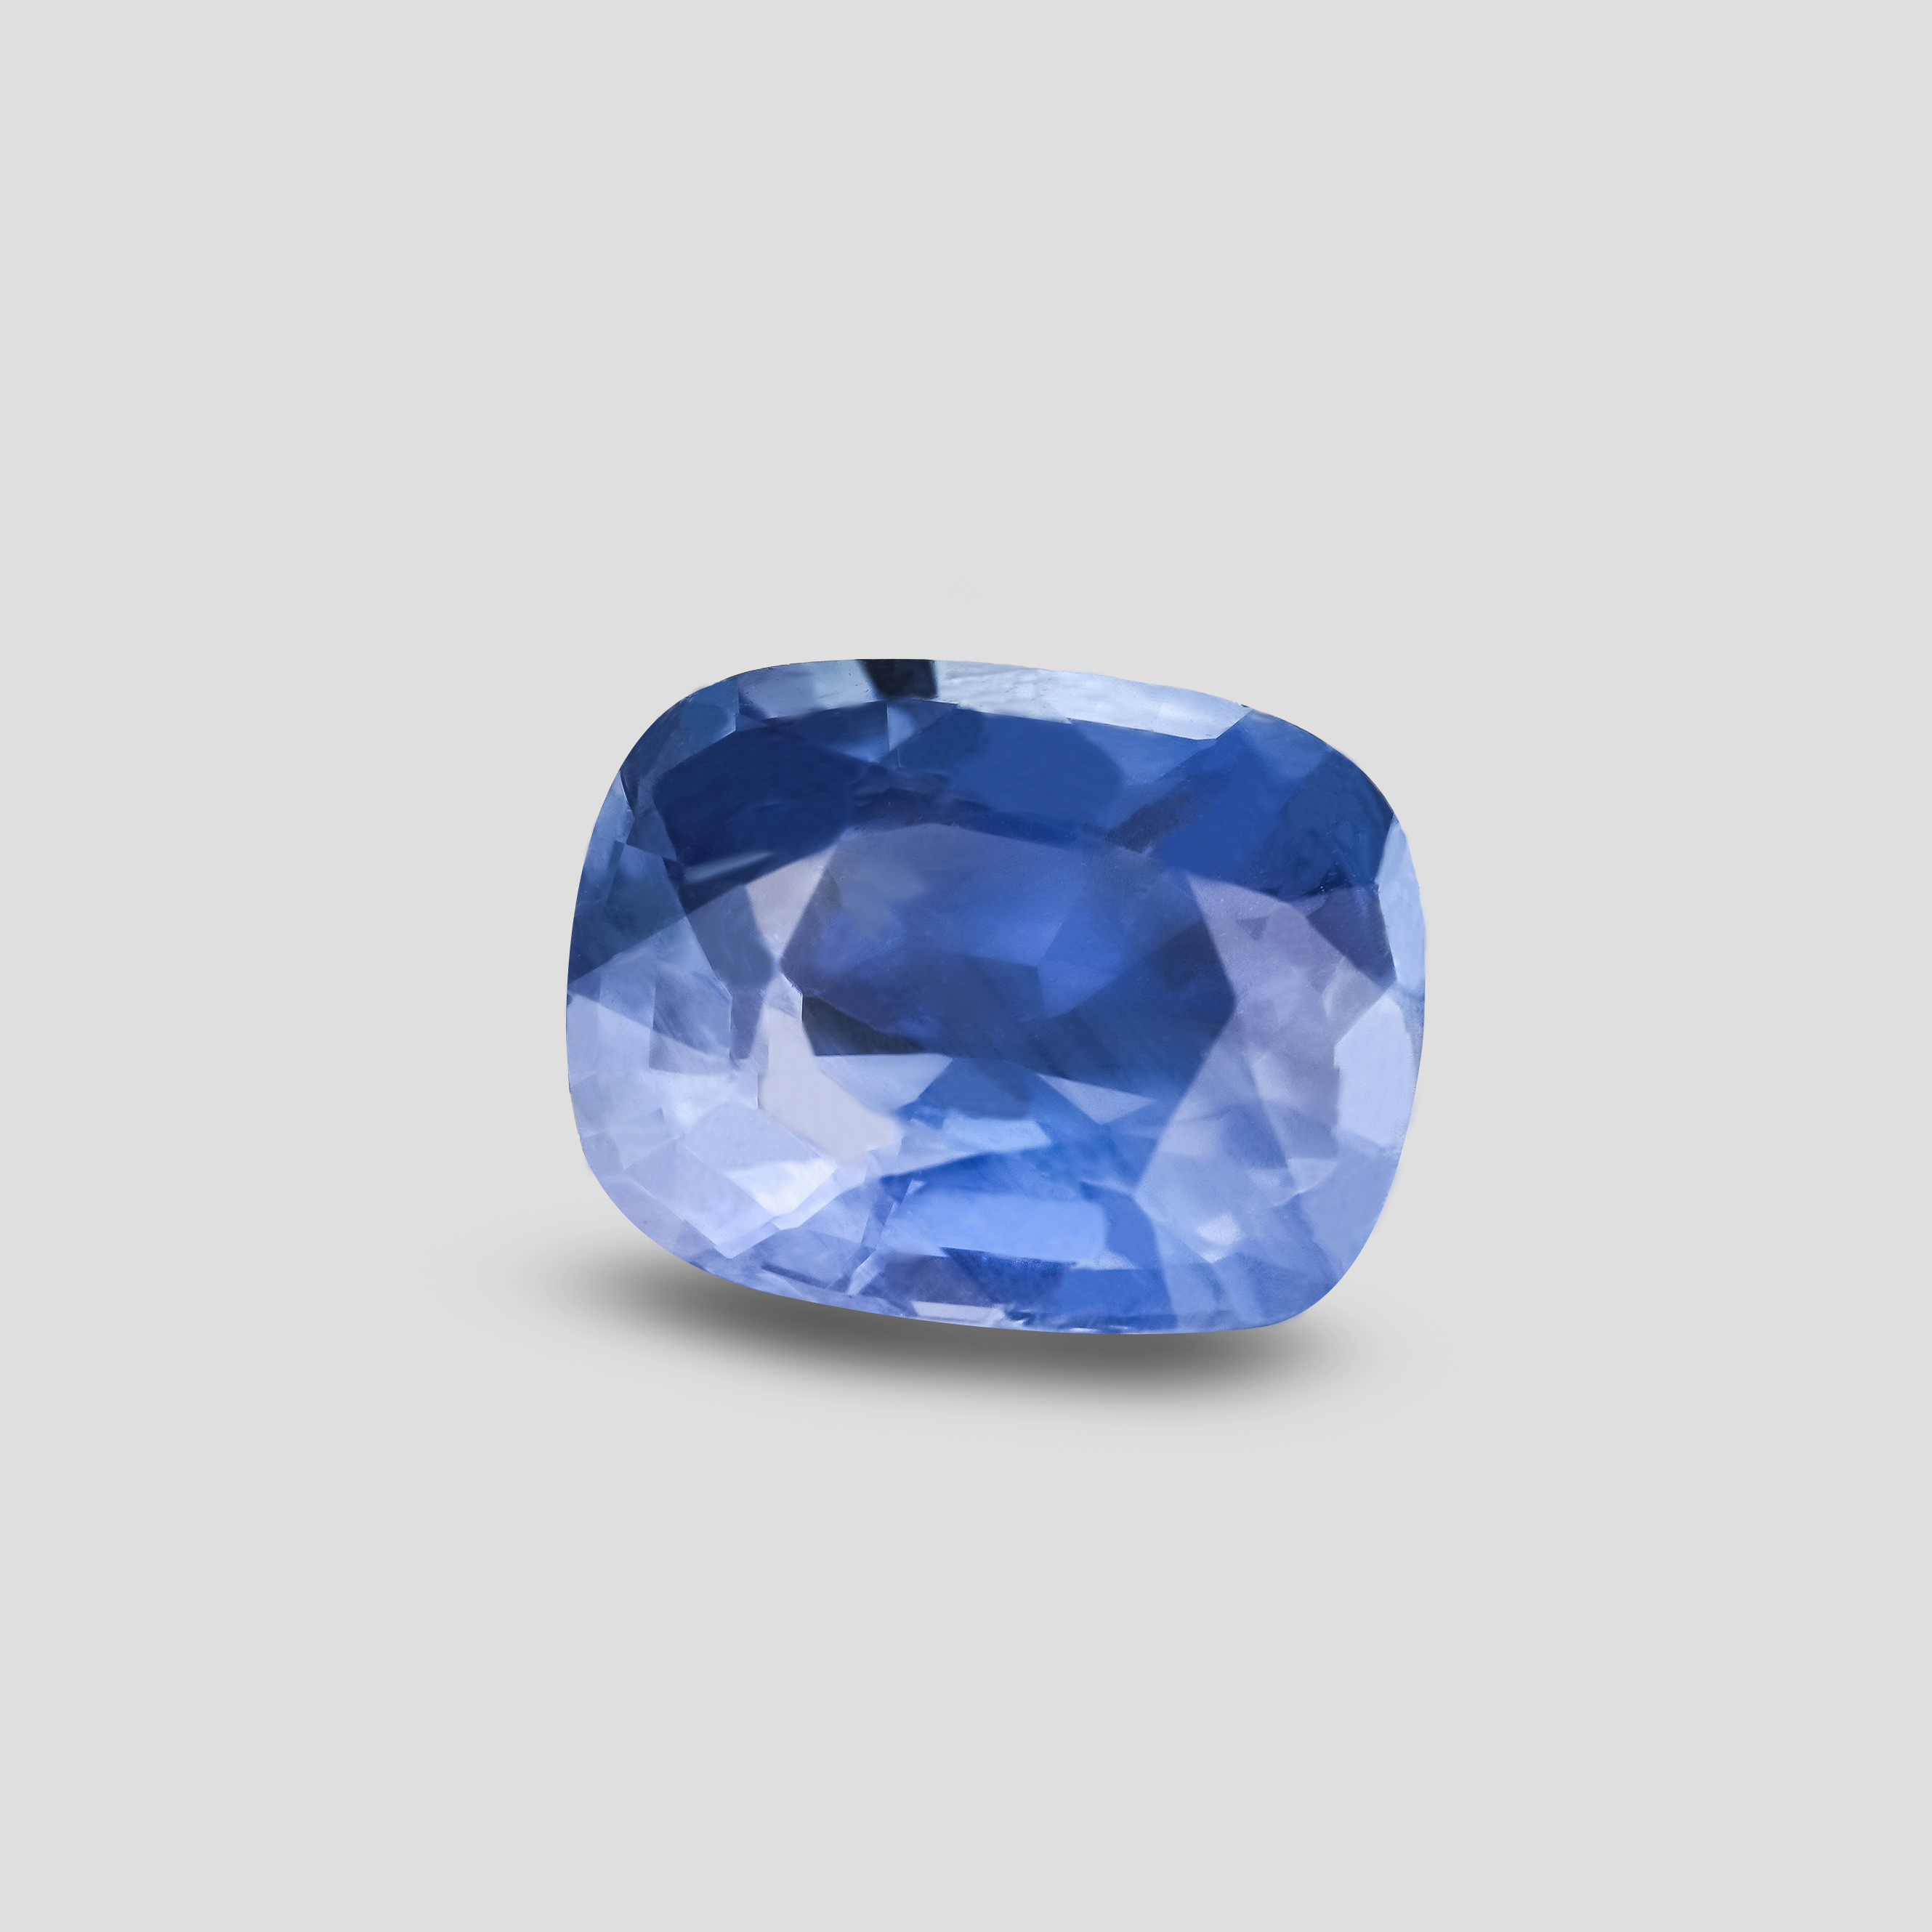 ((do)$ (keep/add to description / pic)Burmese sapphire with KASH